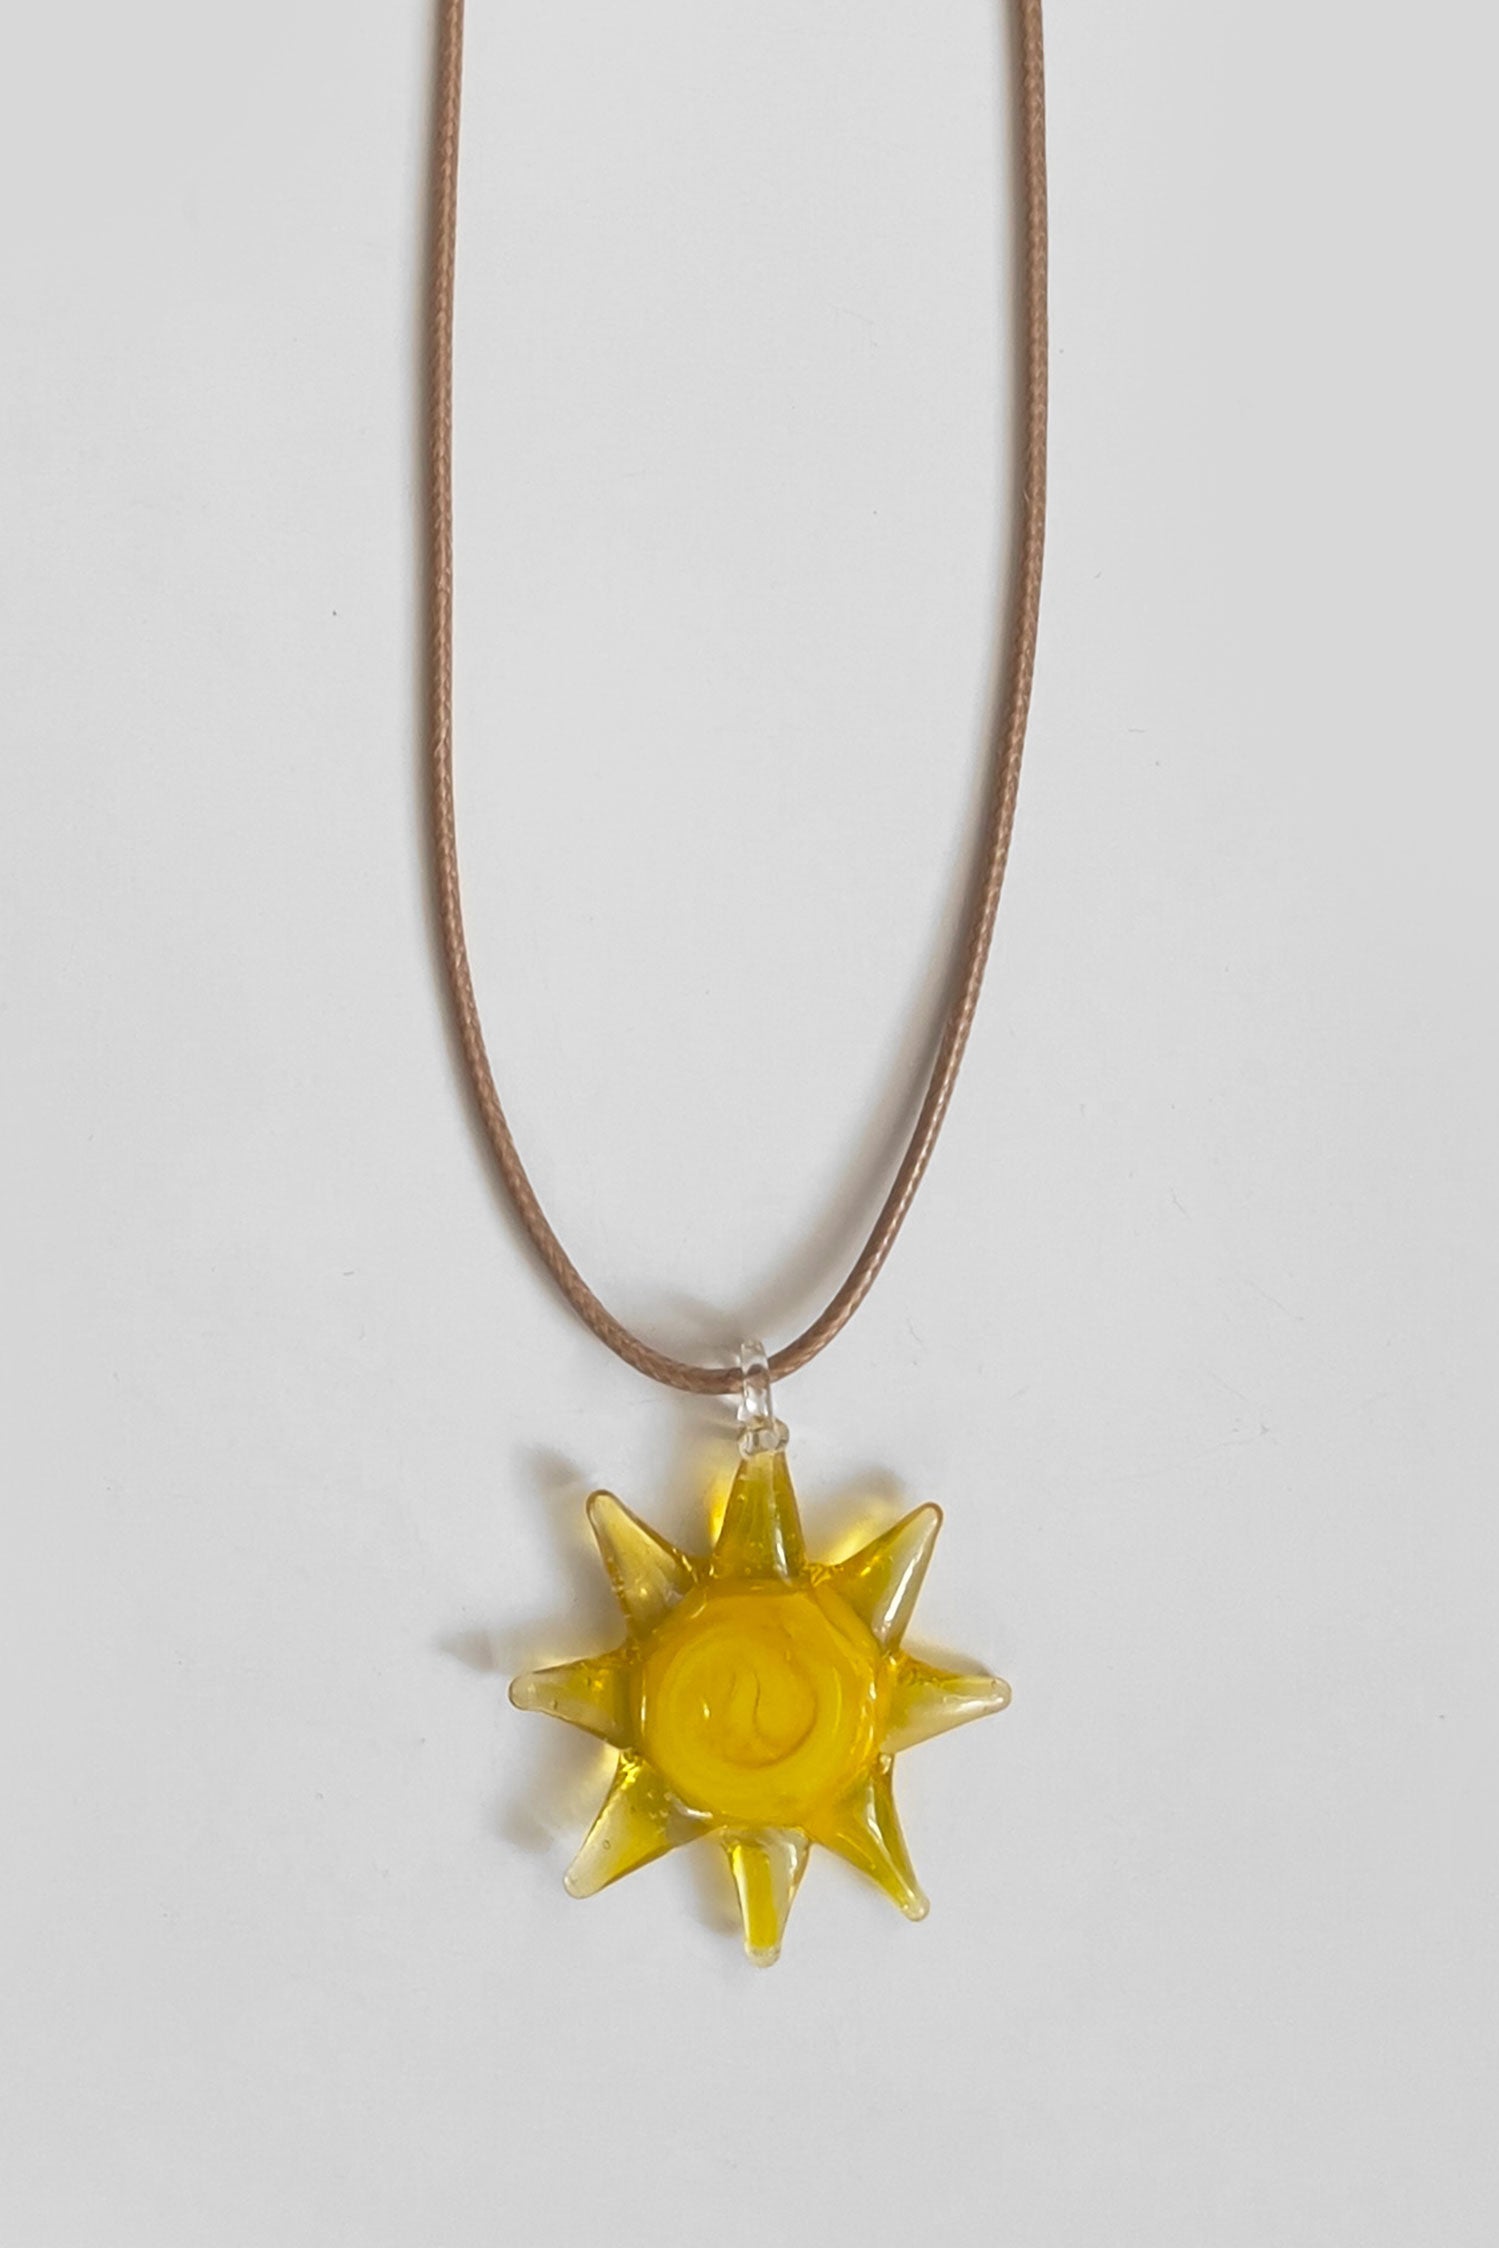 Cord Glass Necklace / Soleil